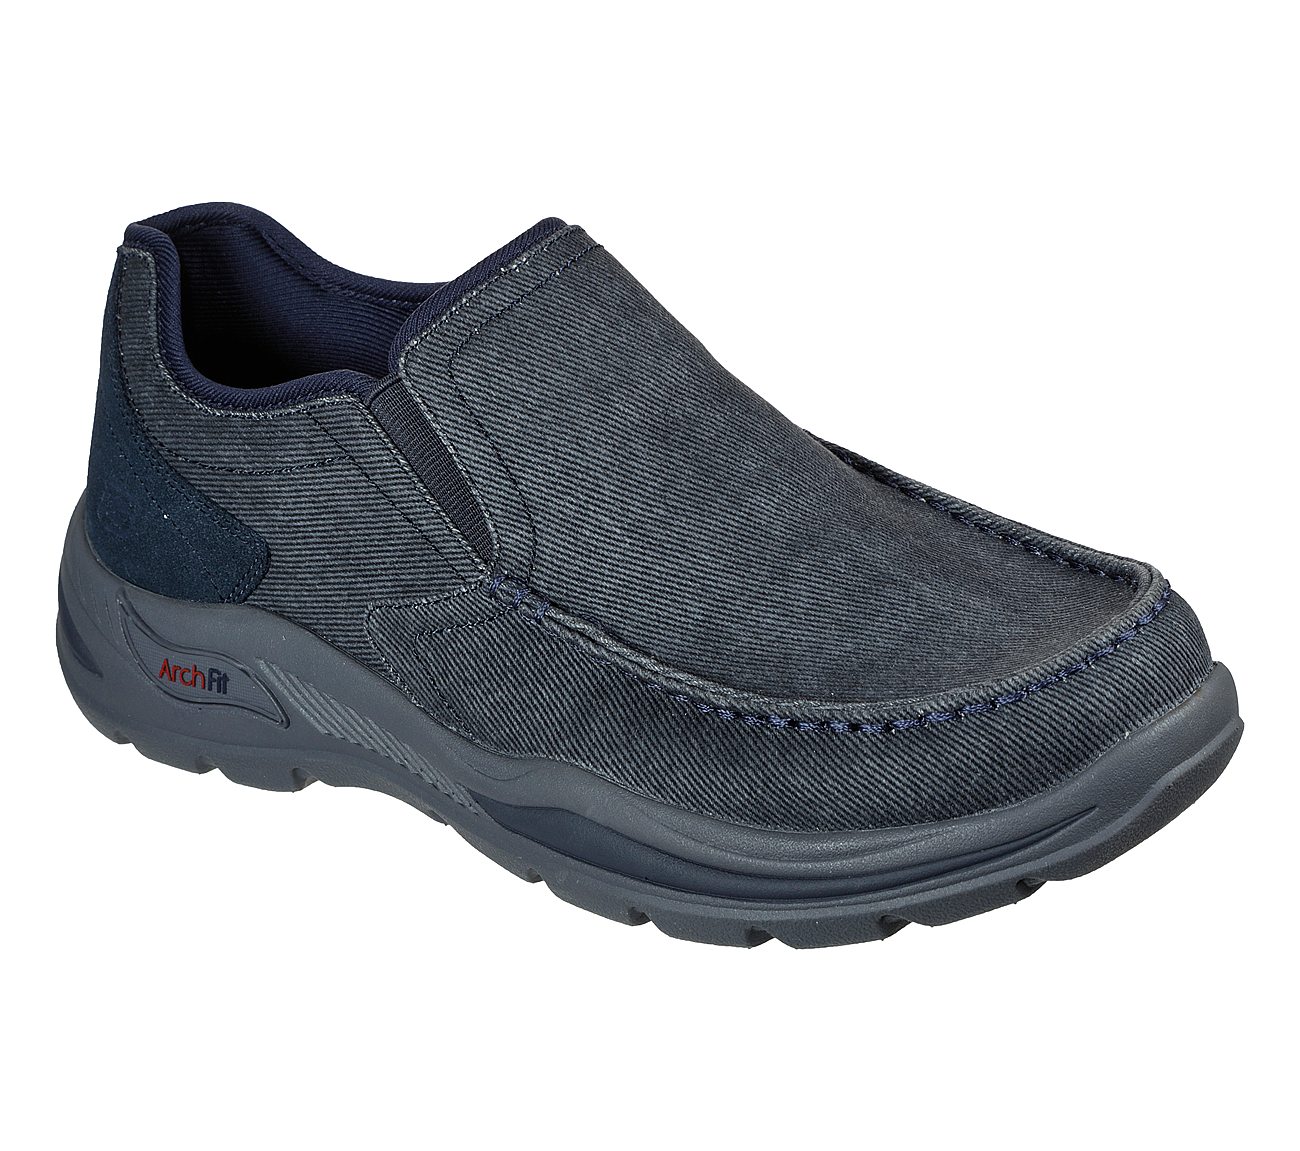 ARCH FIT MOTLEY - ROLENS, NNNAVY Footwear Lateral View